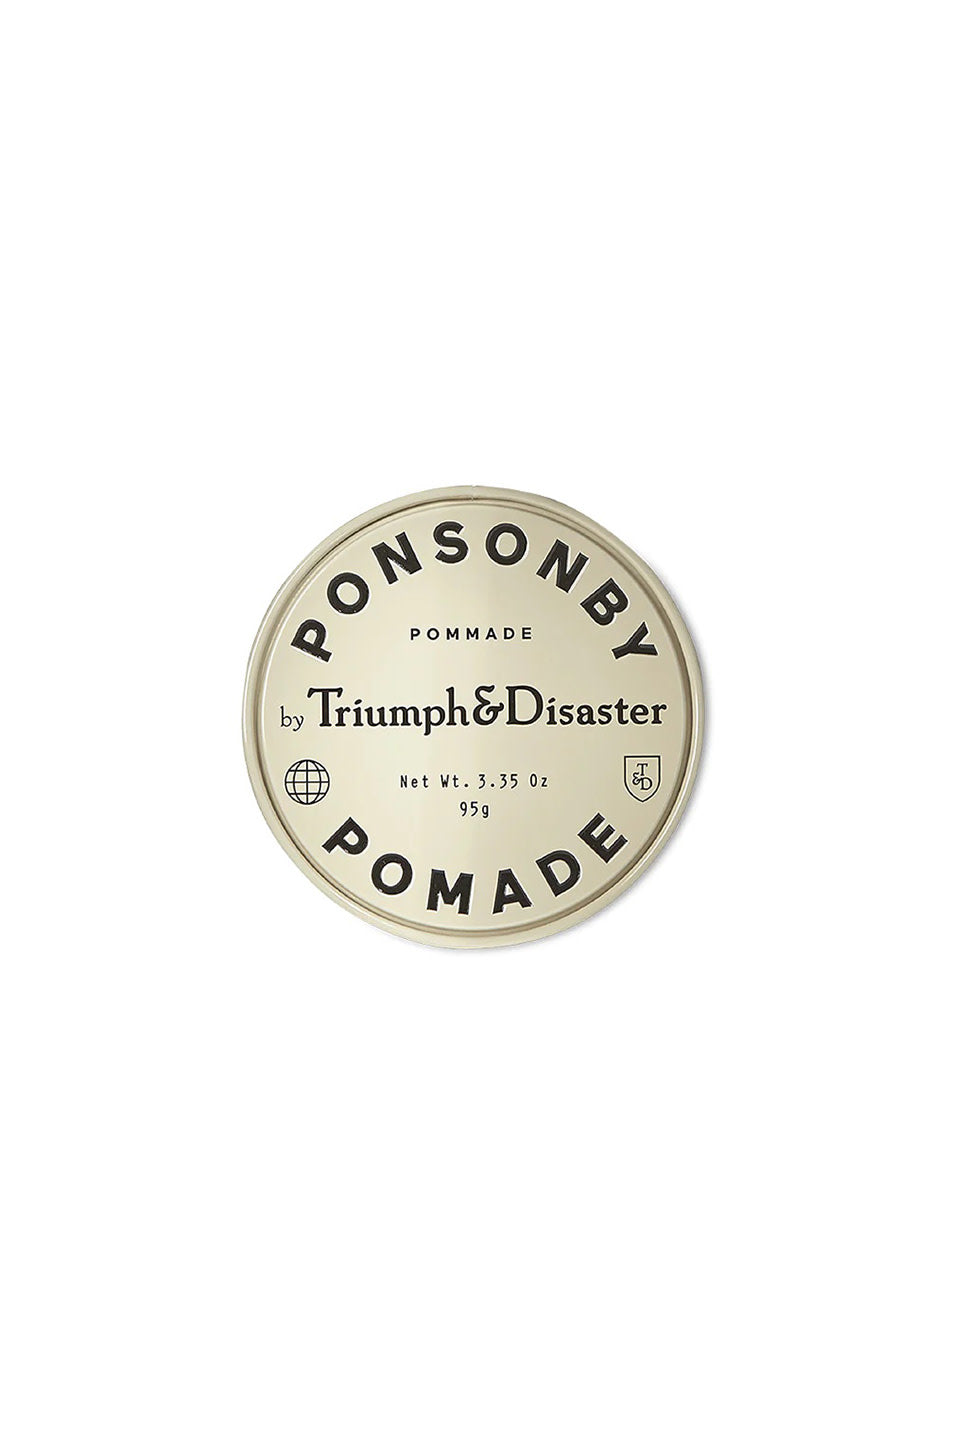 Triumph & Disaster - Ponsonby Pomade